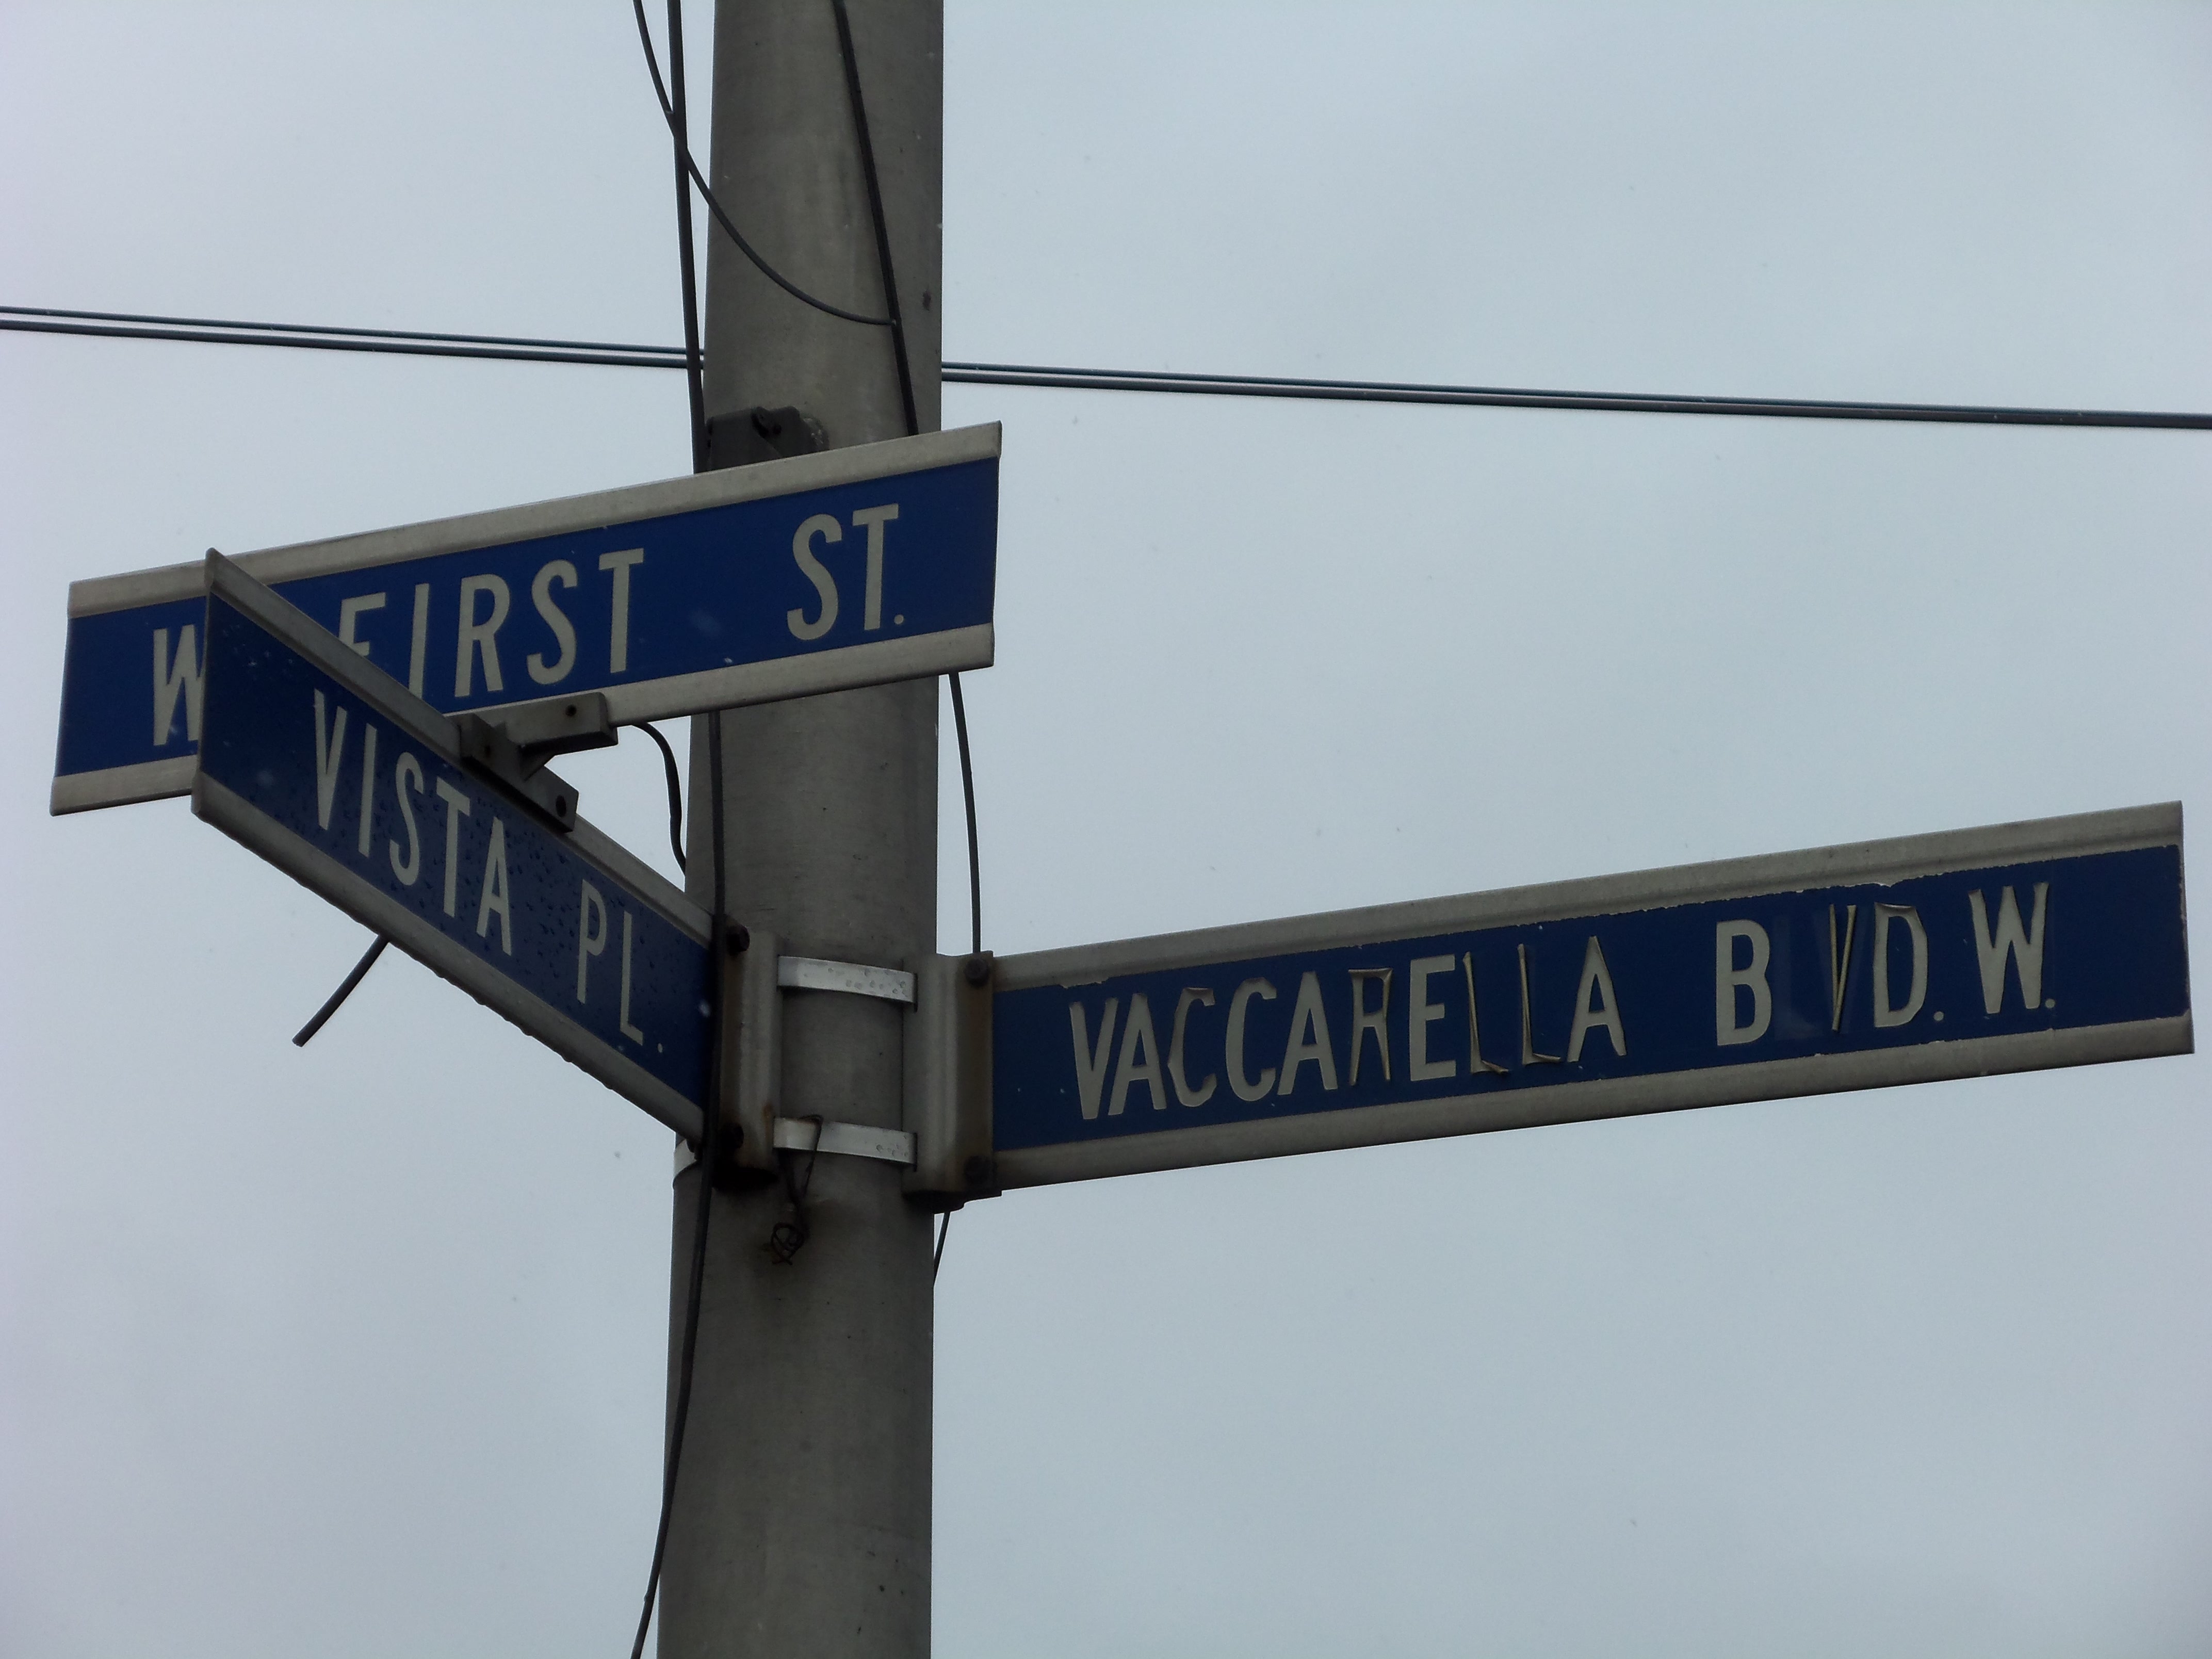 White letters on blue street signs